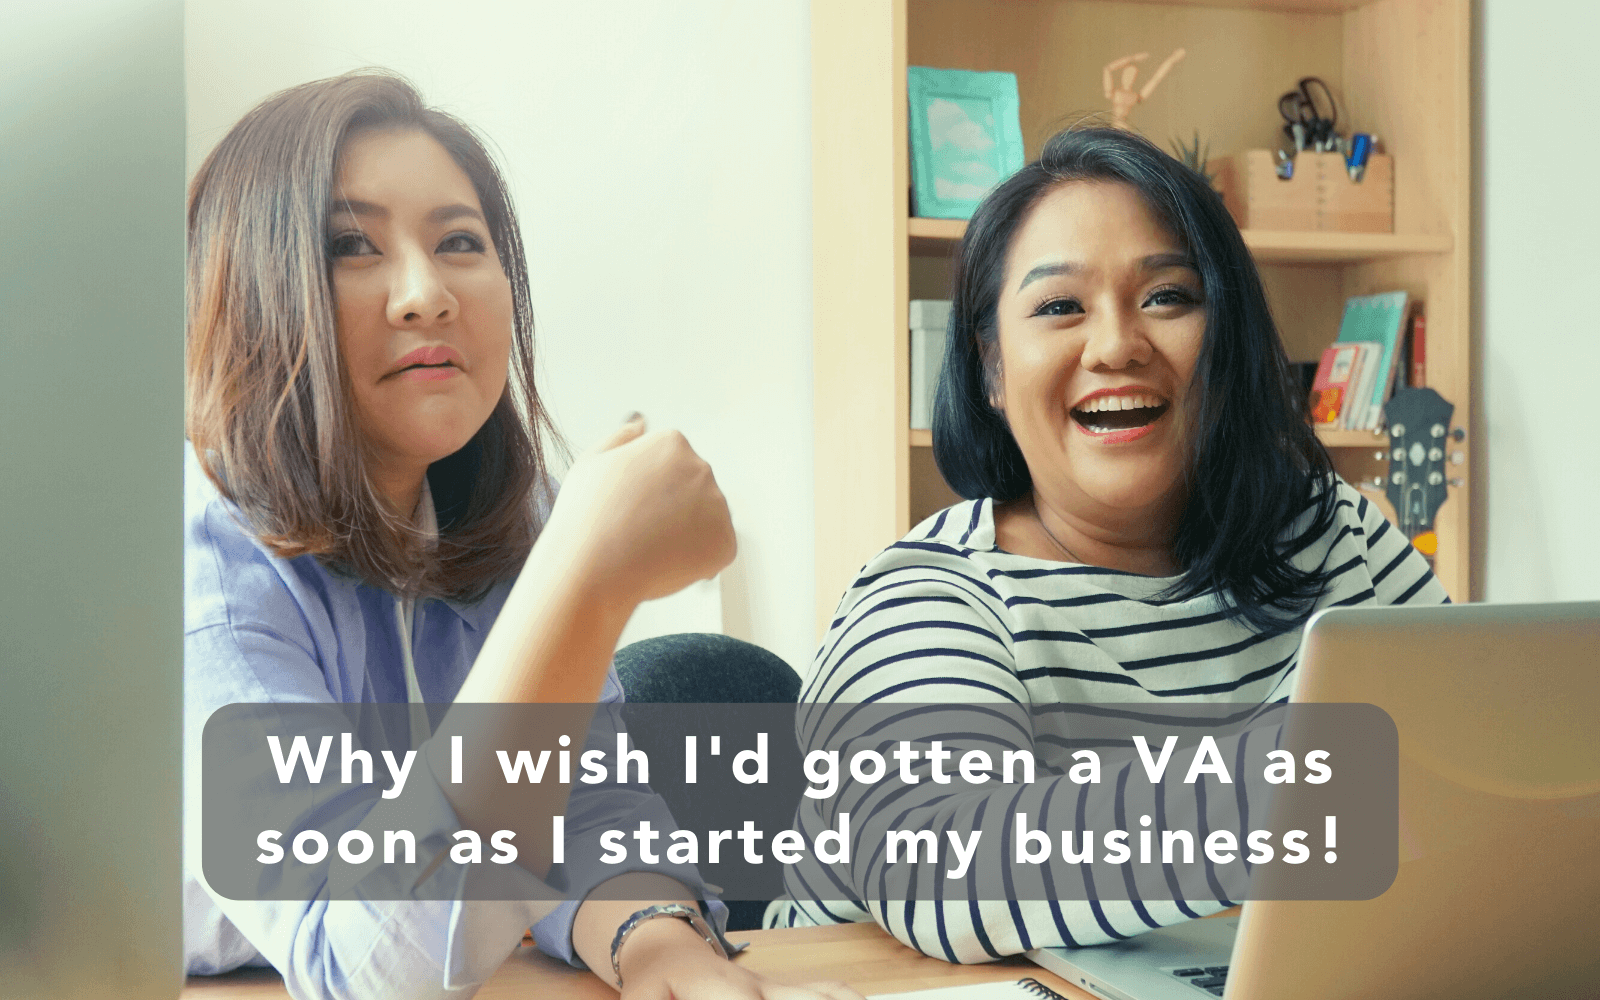 Why I wish I'd gotten a VA as soon as I started my business!